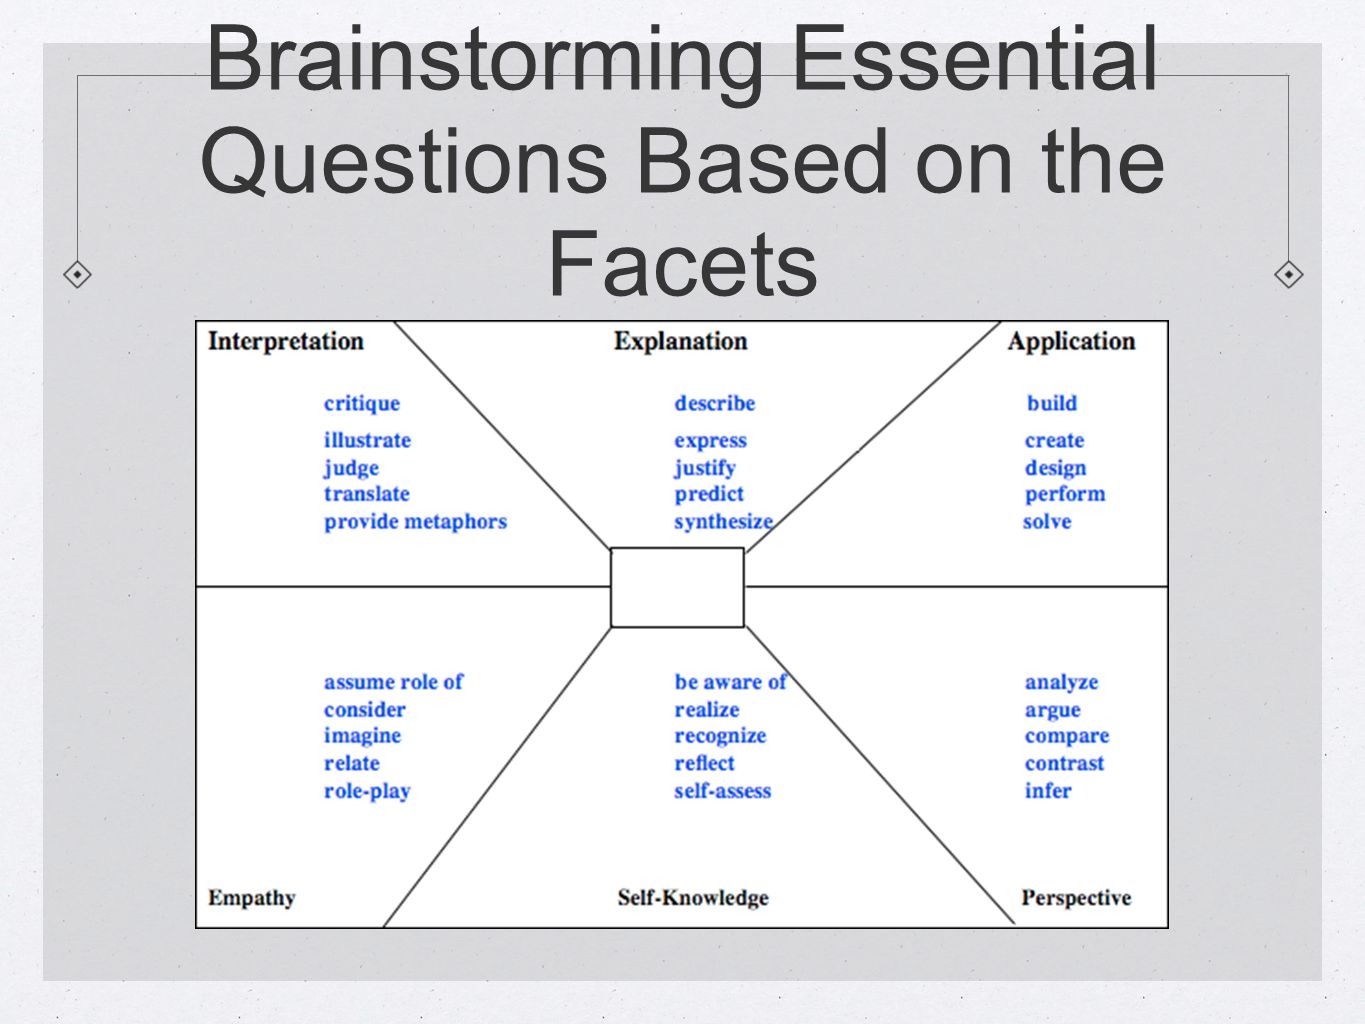 Brainstorming Essential Questions Based on the Facets